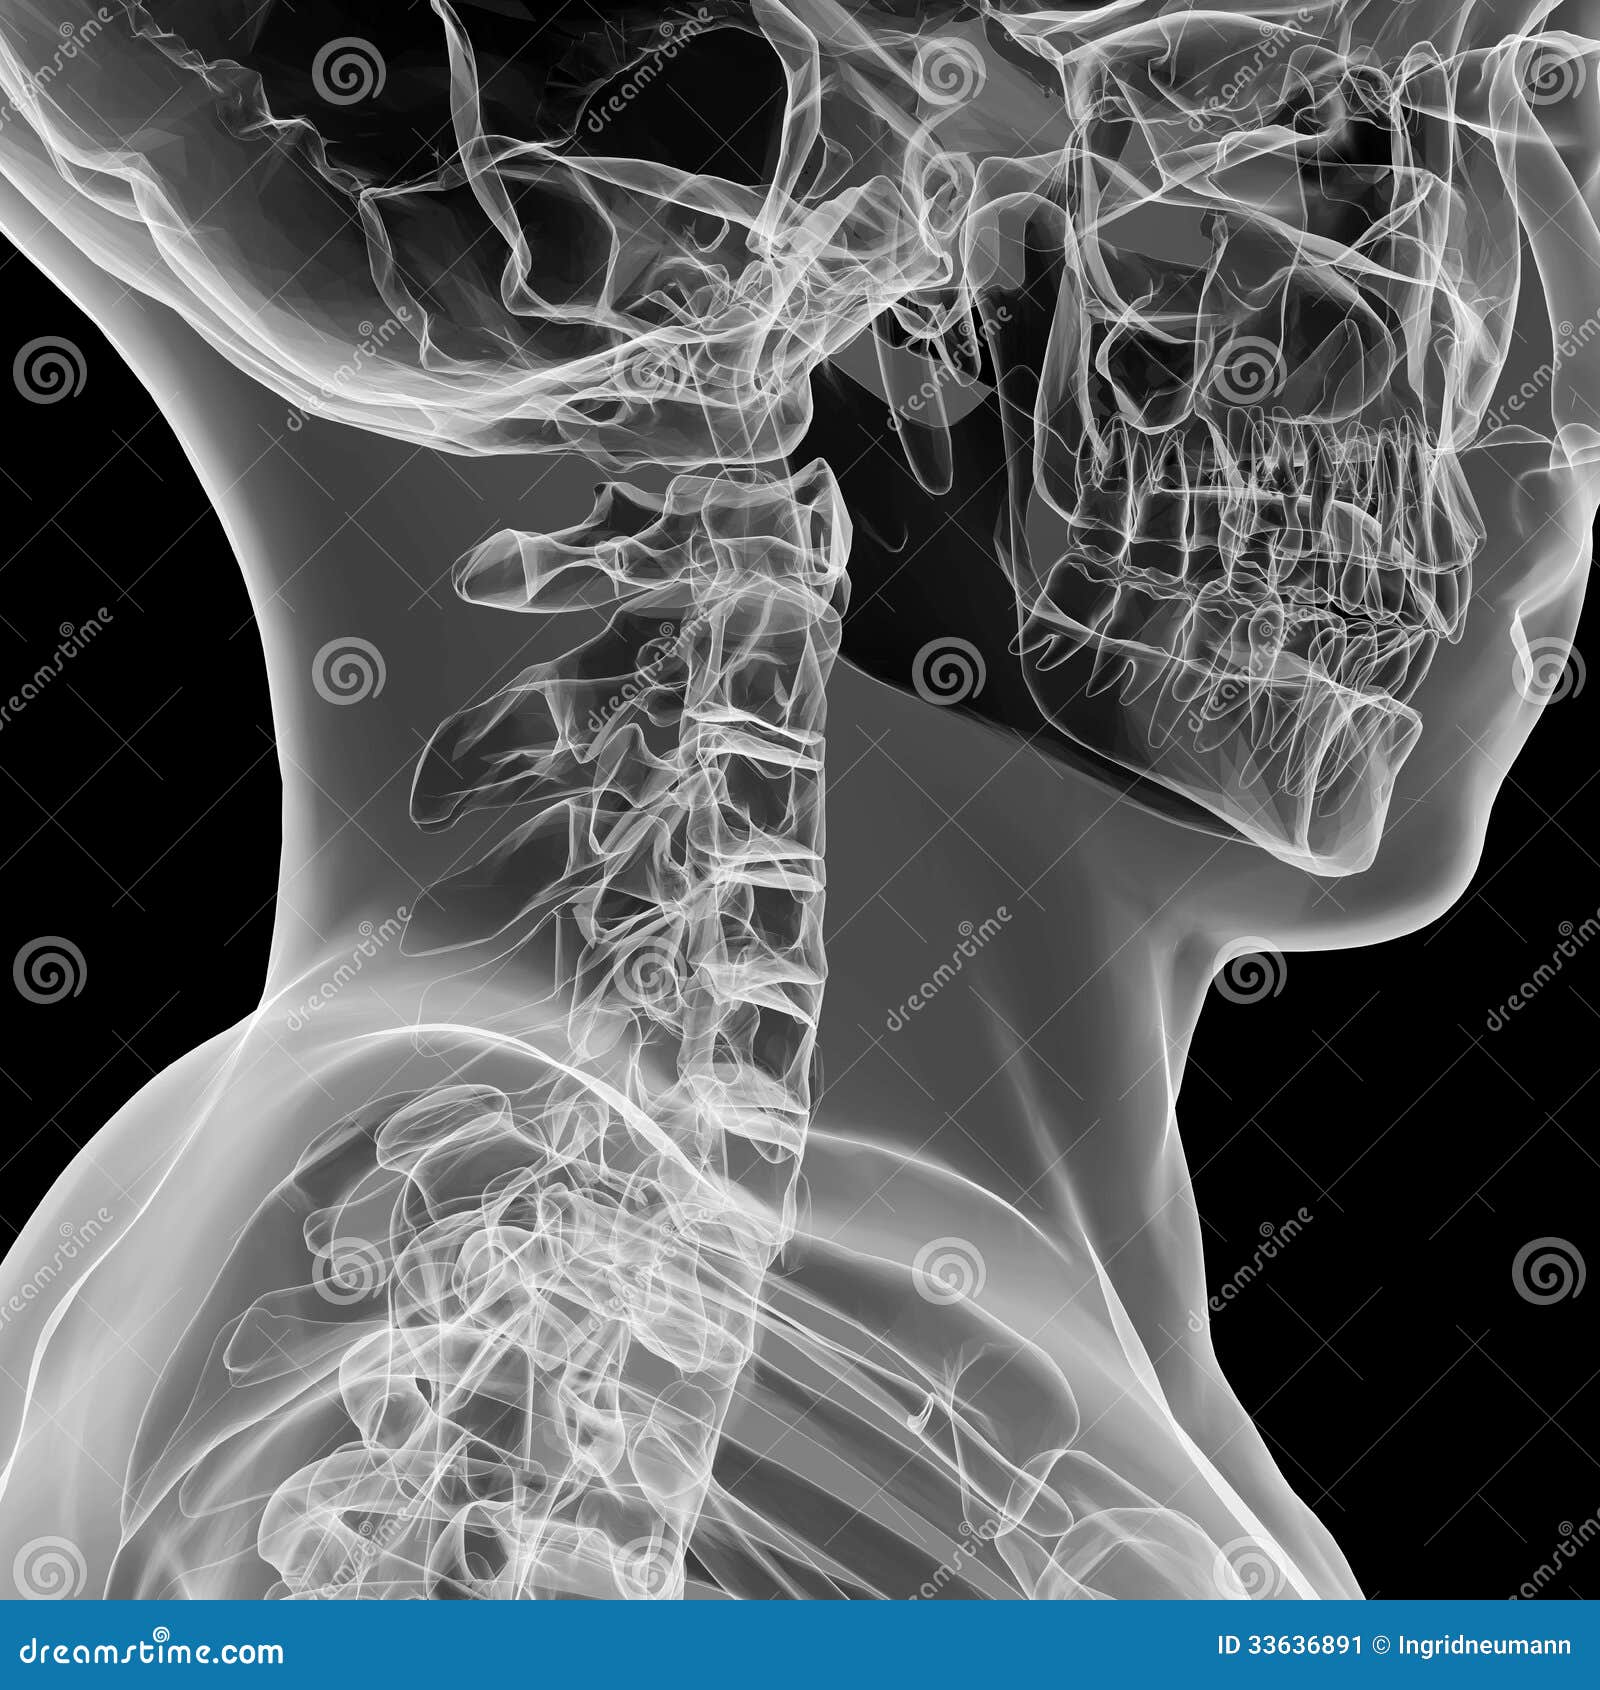 X-ray View Of Human Cervical Spine Stock Image - Image: 33636891